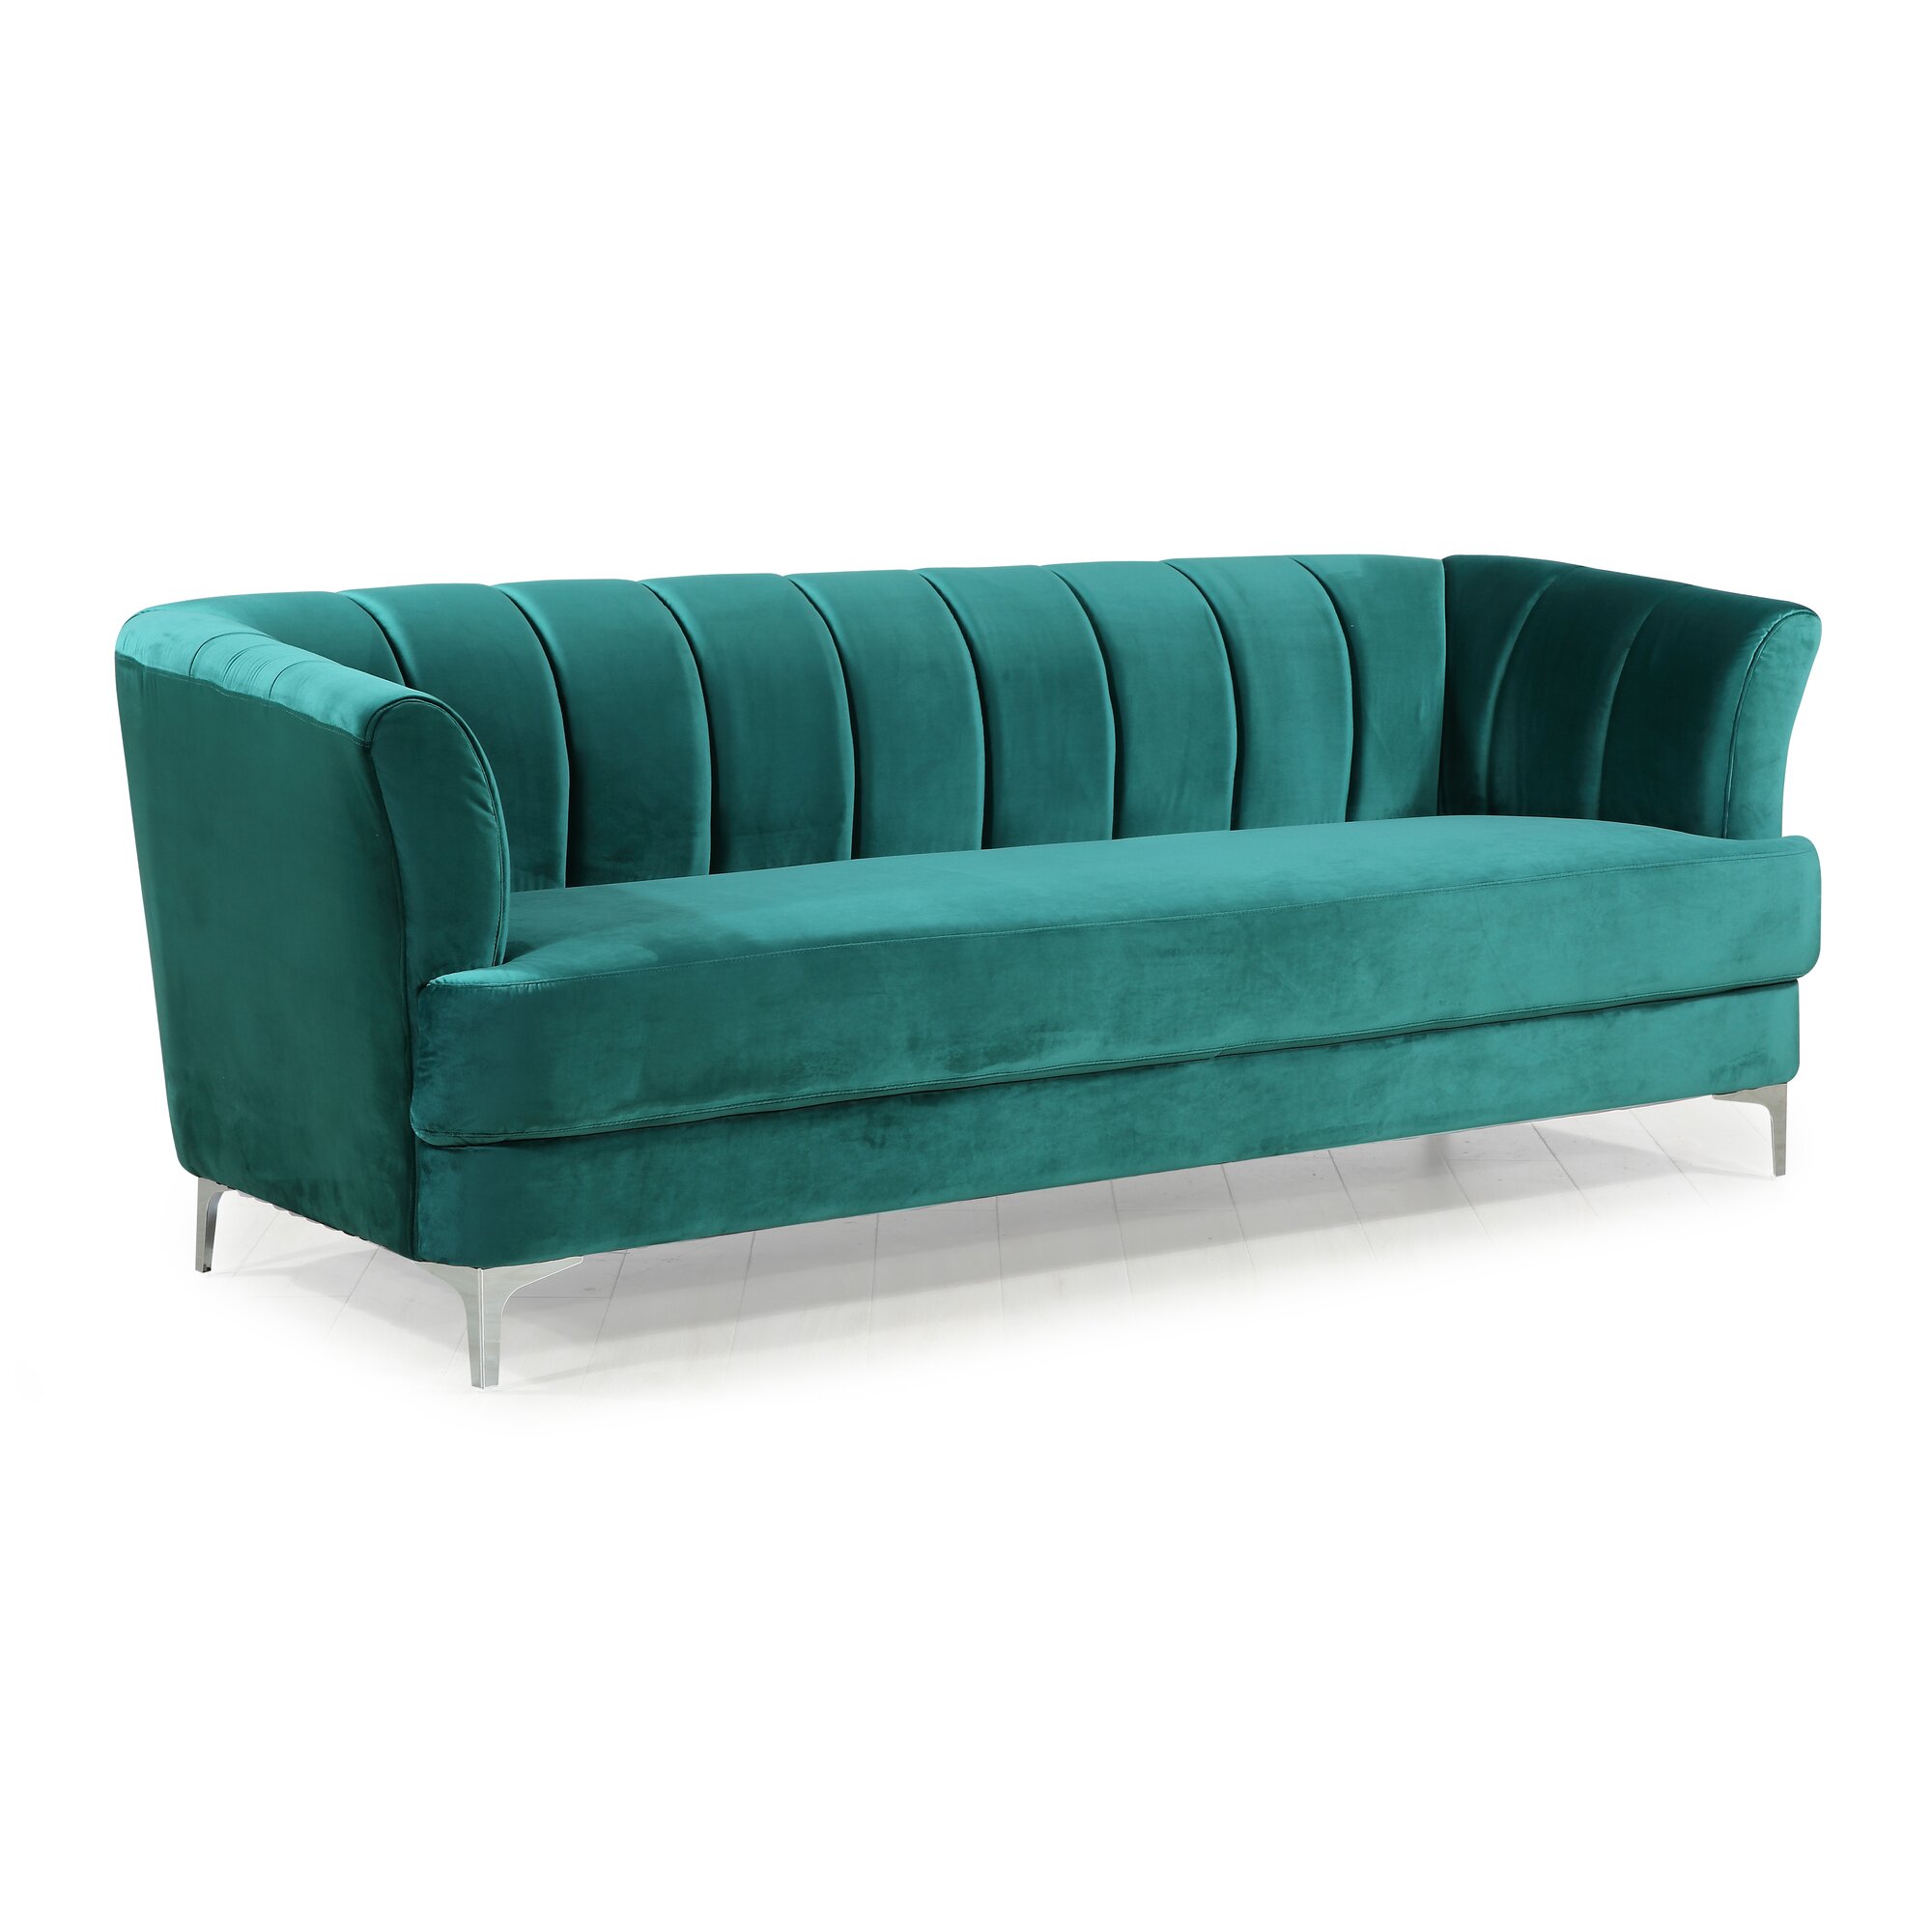 Curved Chesterfield Sofa Instasofasus